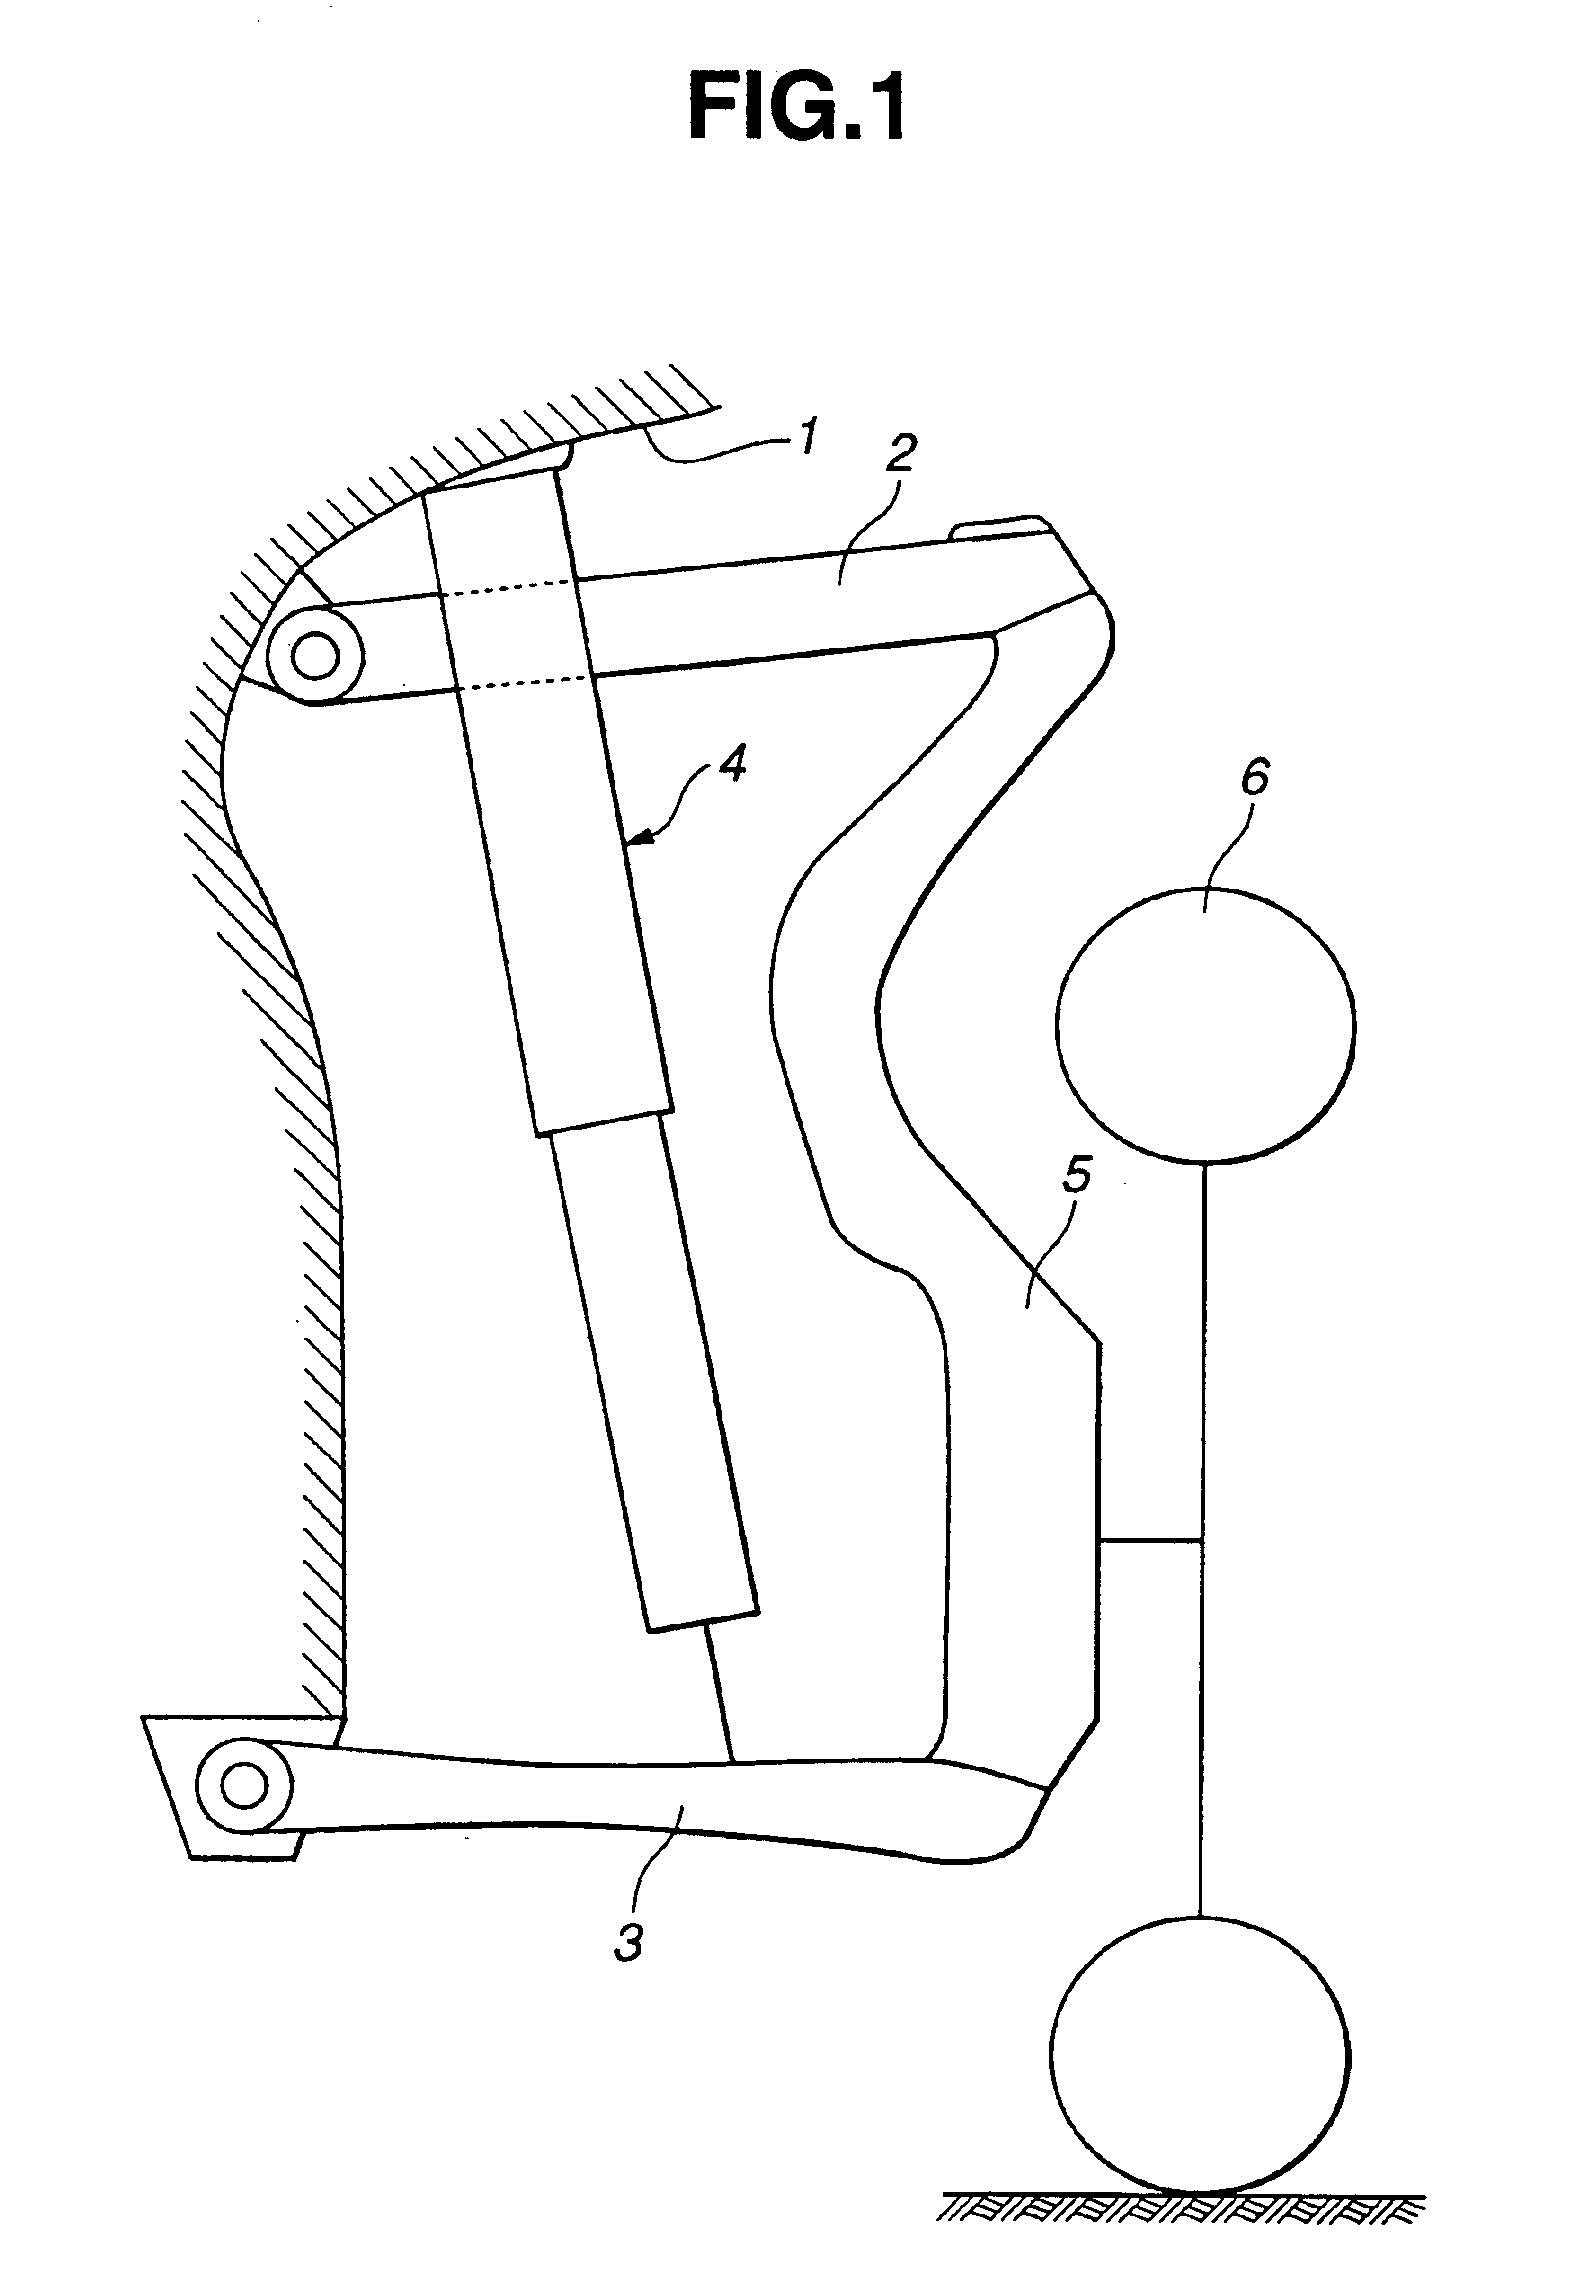 Electromagnetic suspension system for vehicle